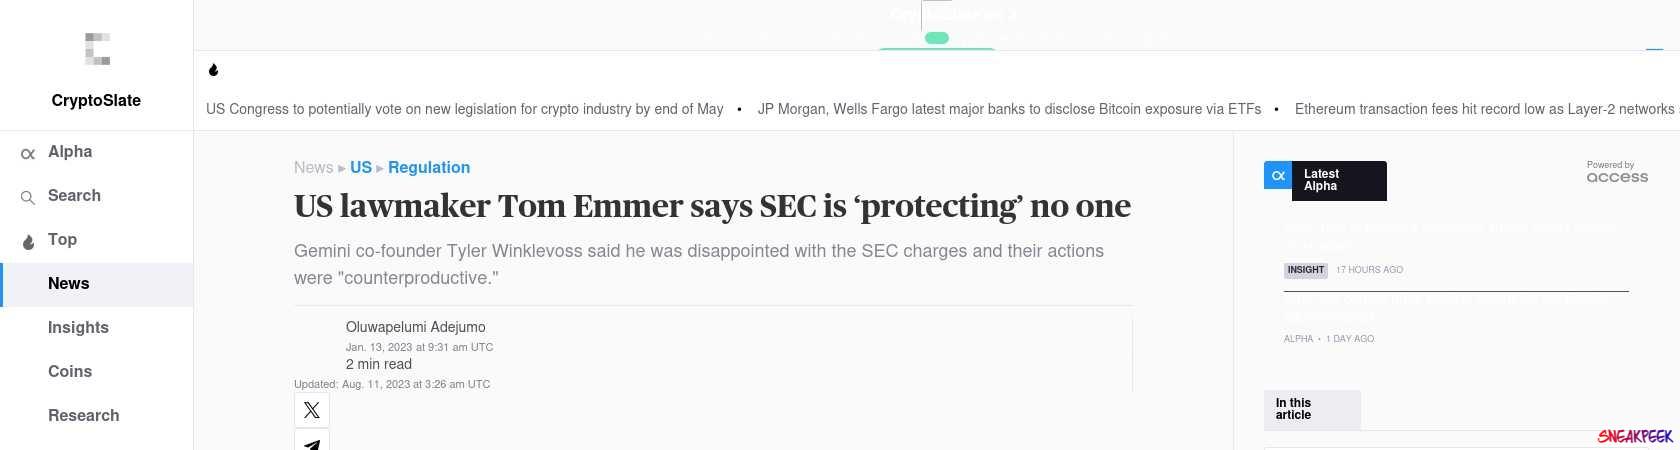 Read the full Article:  ⭲ US lawmaker Tom Emmer says SEC is ‘protecting’ no one